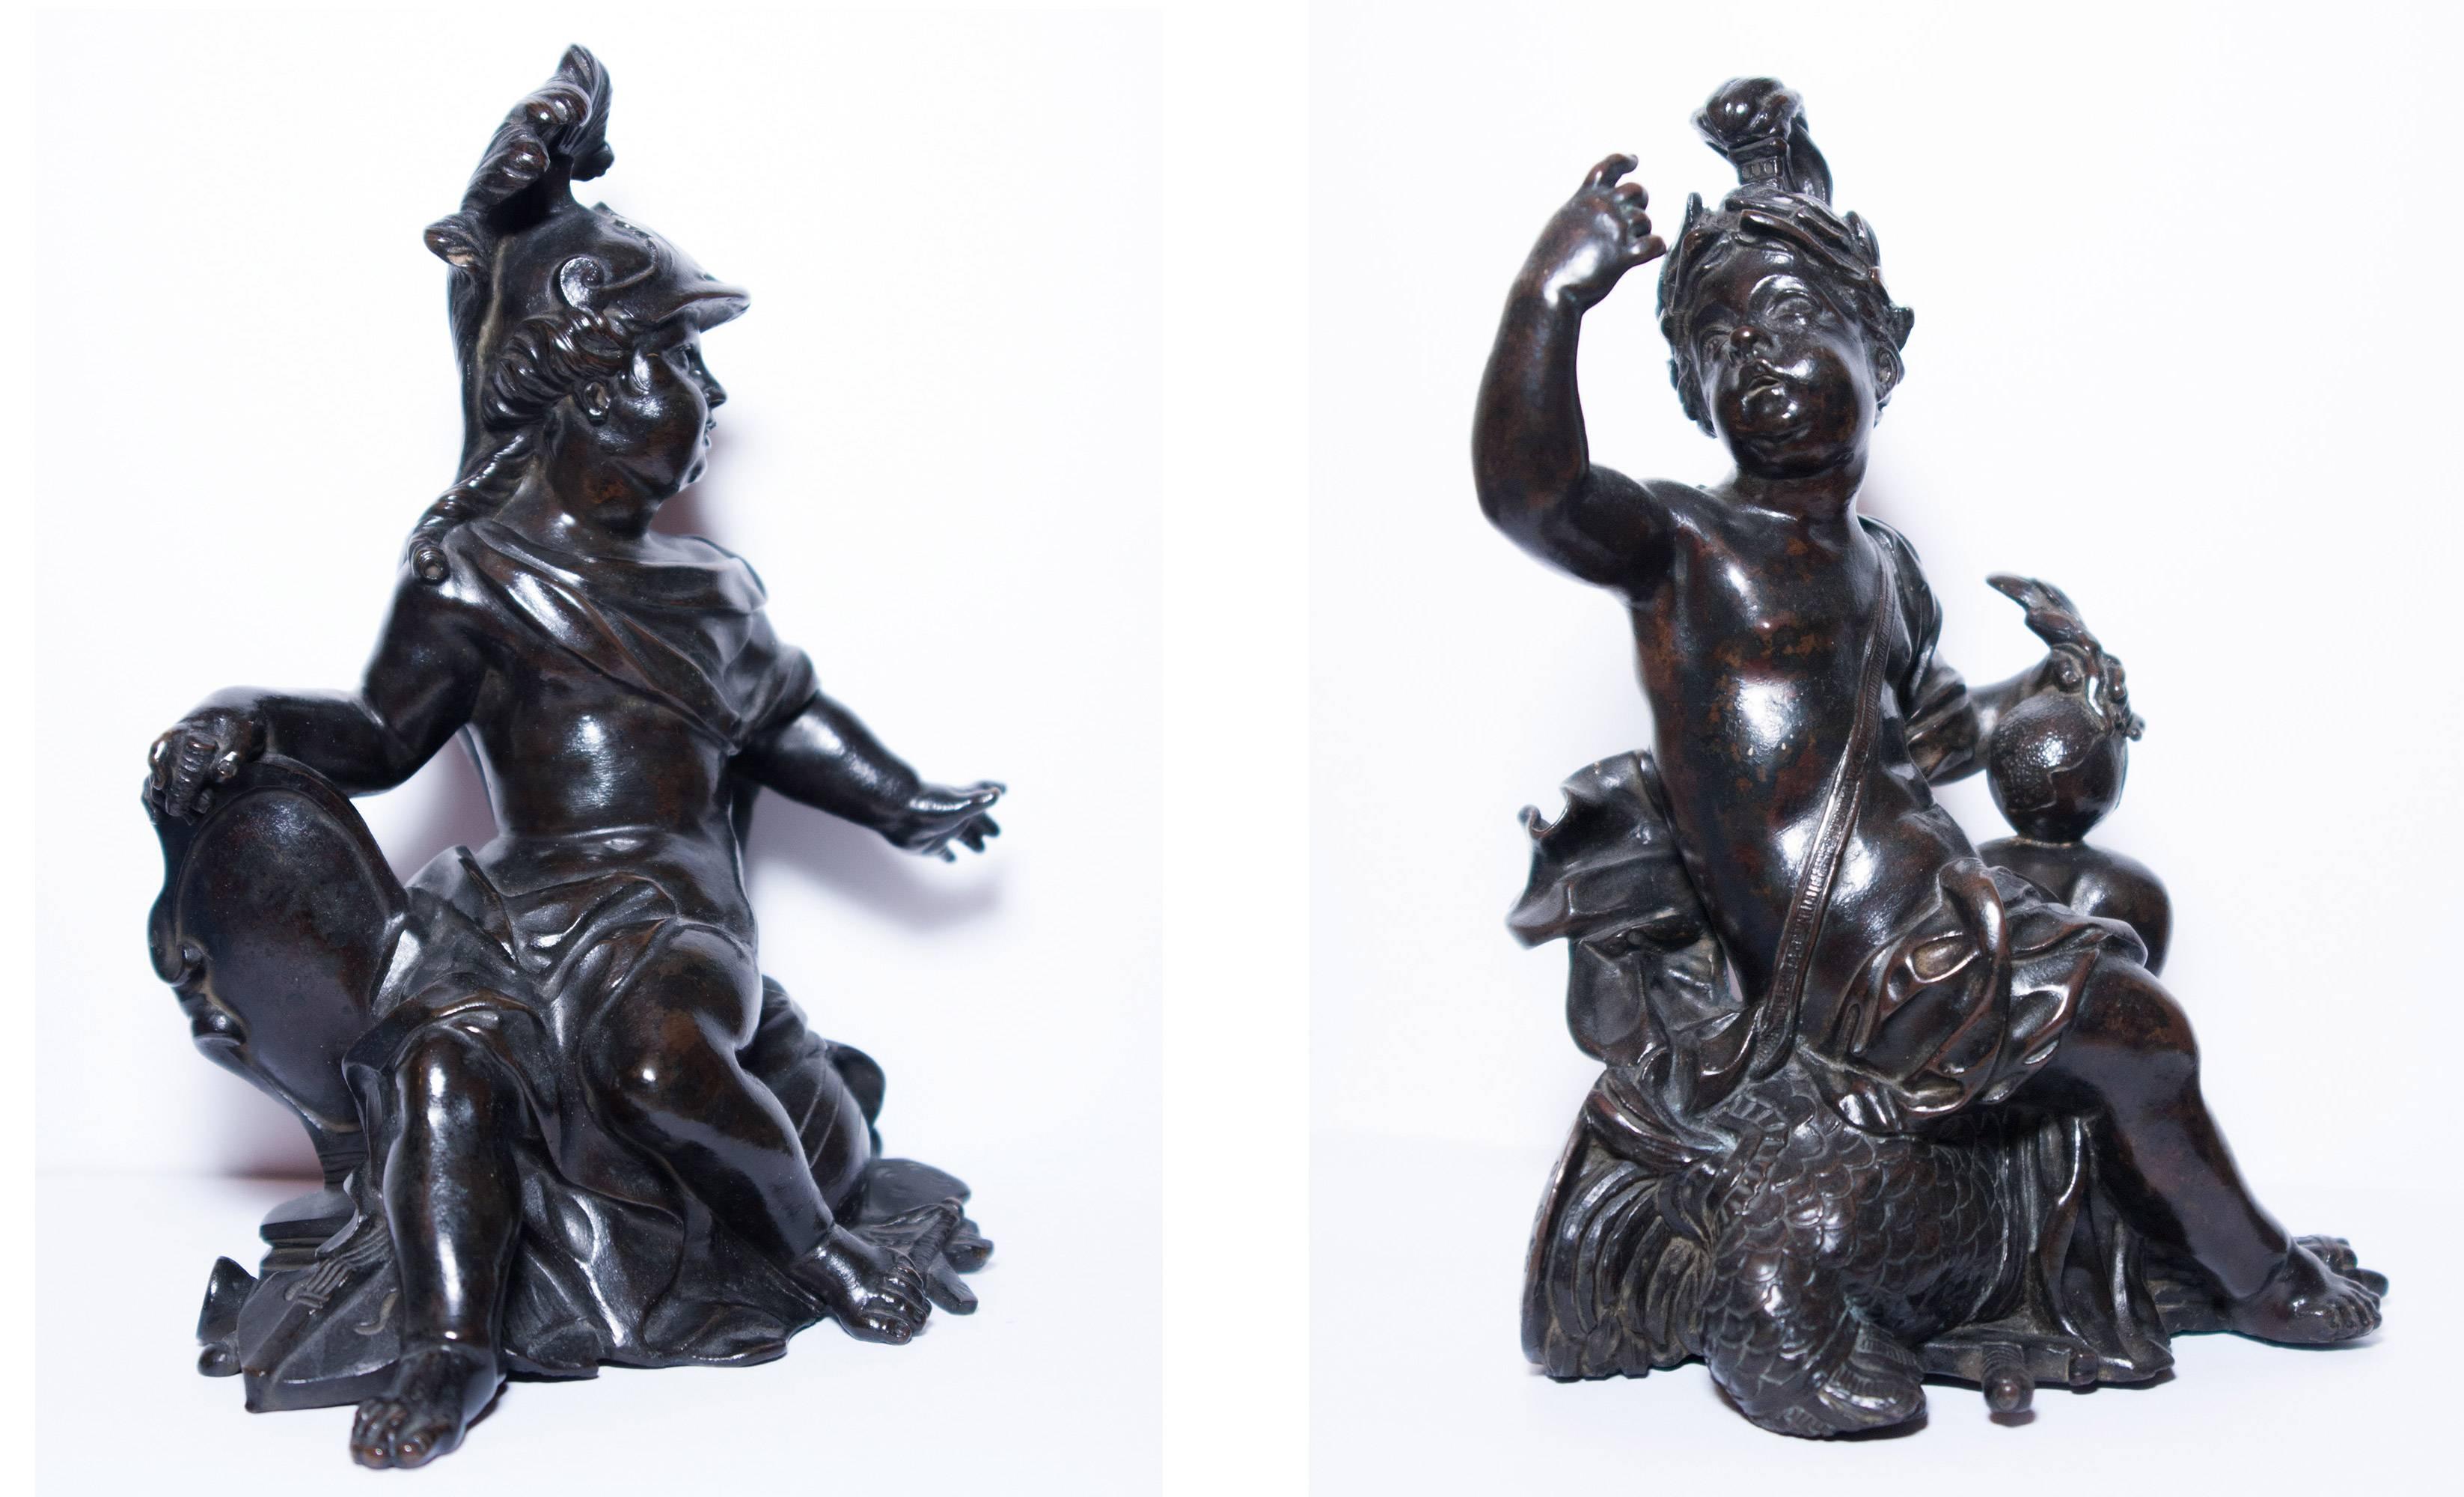 Unknown Figurative Sculpture - Pair of allegorical bronze figures, French Regency period